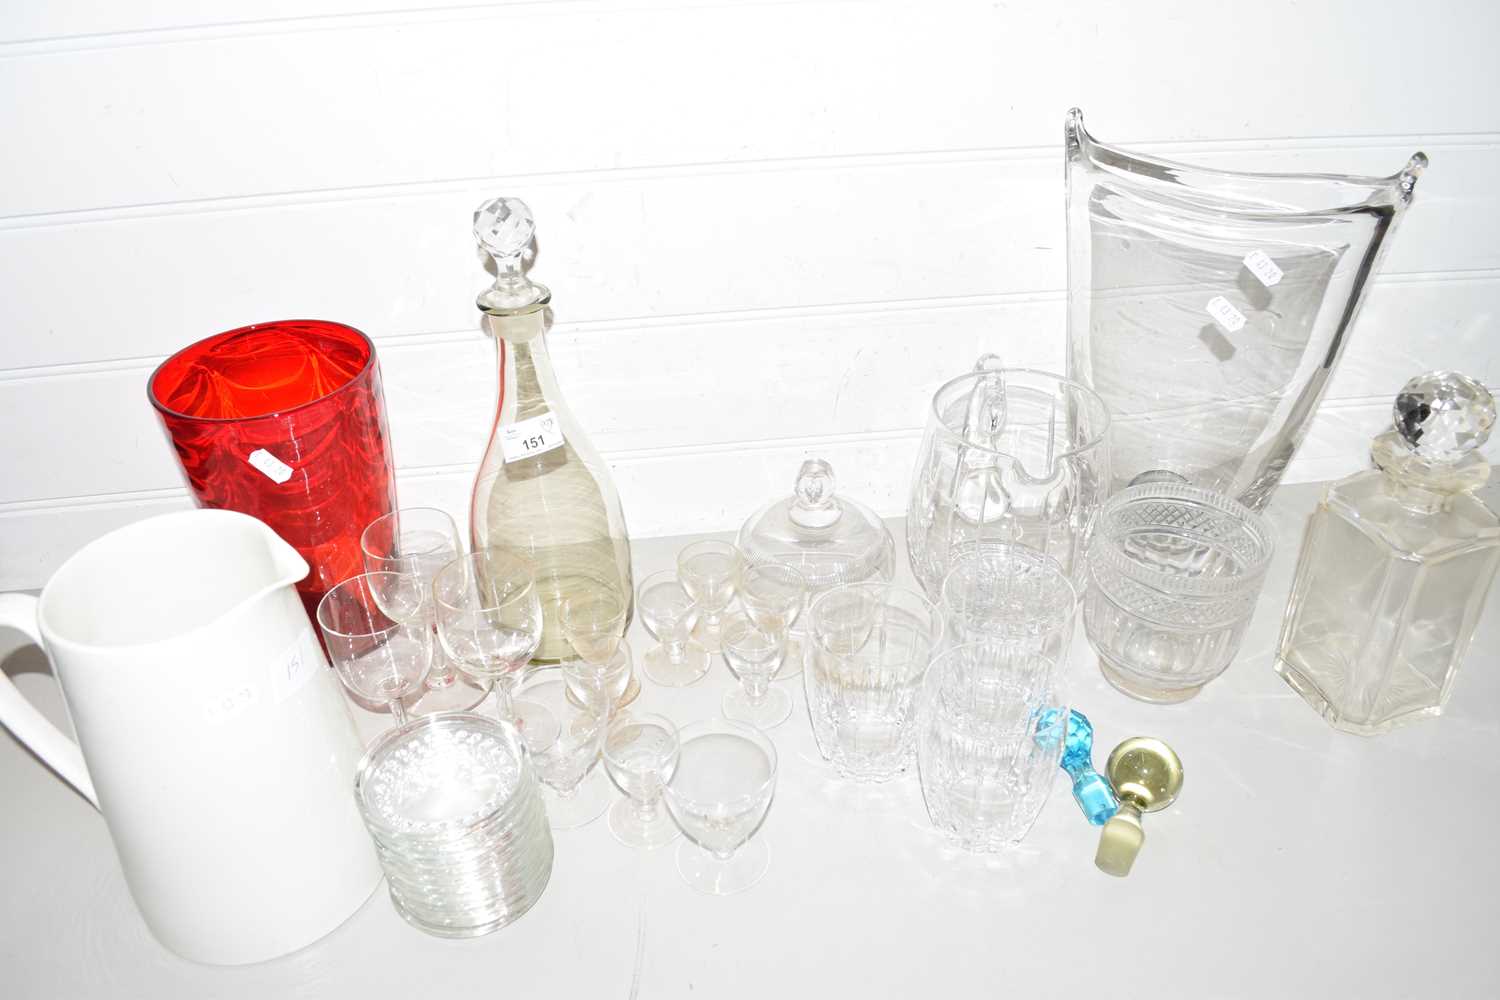 GROUP OF GLASS WARES INCLUDING A DECANTER WITH FACETED STOPPER, GLASS DECANTER, POTTERY JUG AND